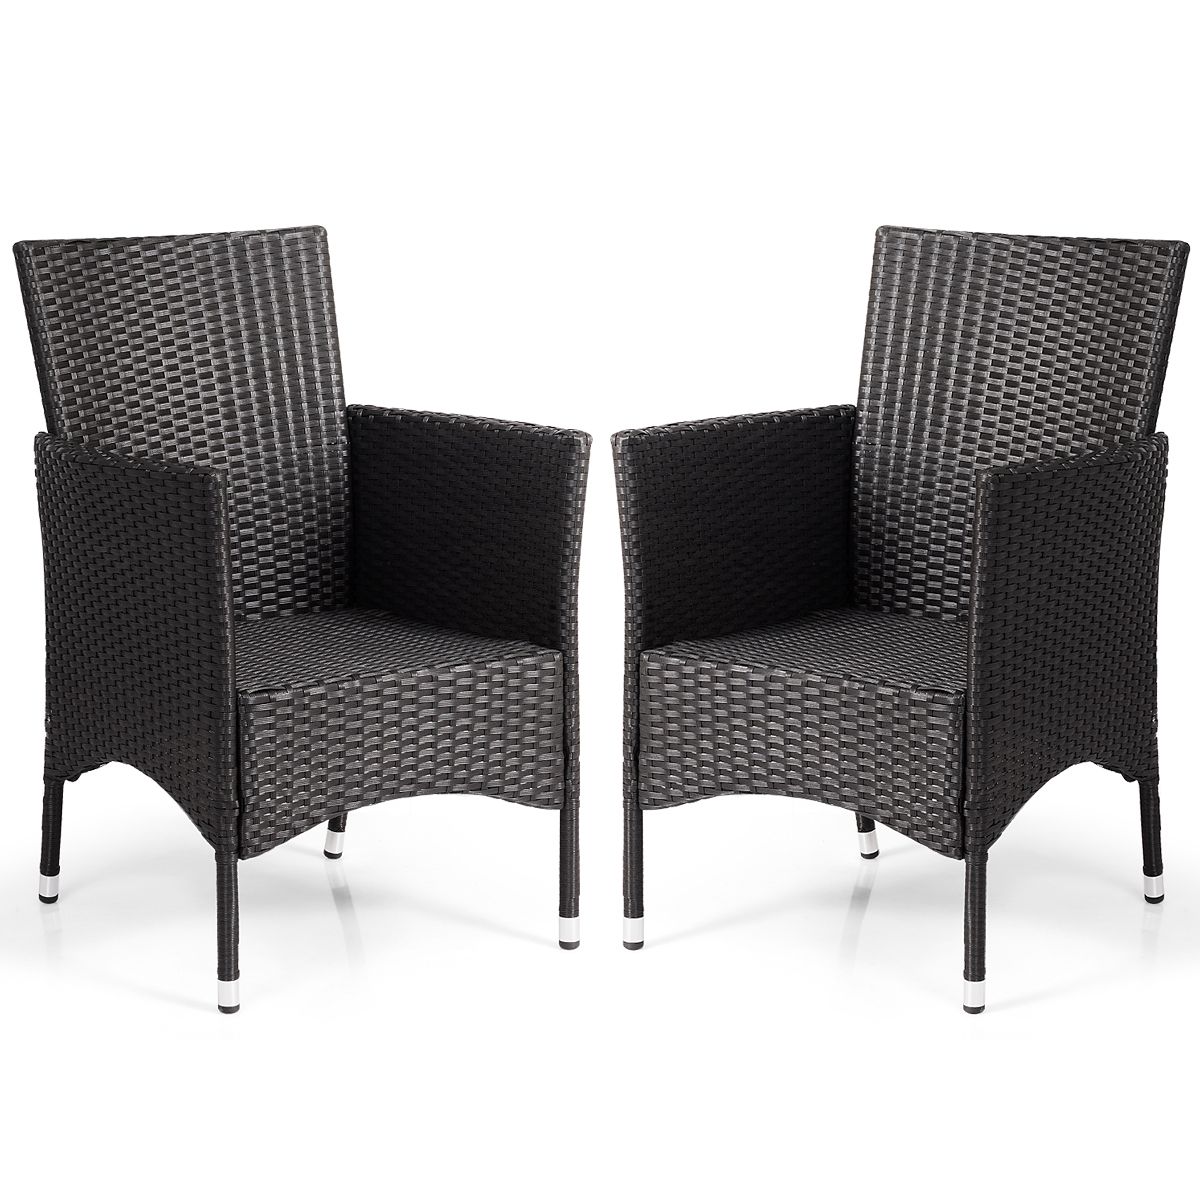 2019 Giantex 2pc Patio Rattan Wicker Dining Chairs Set With Cushions Black Within Black Outdoor Dining Chairs (View 11 of 15)